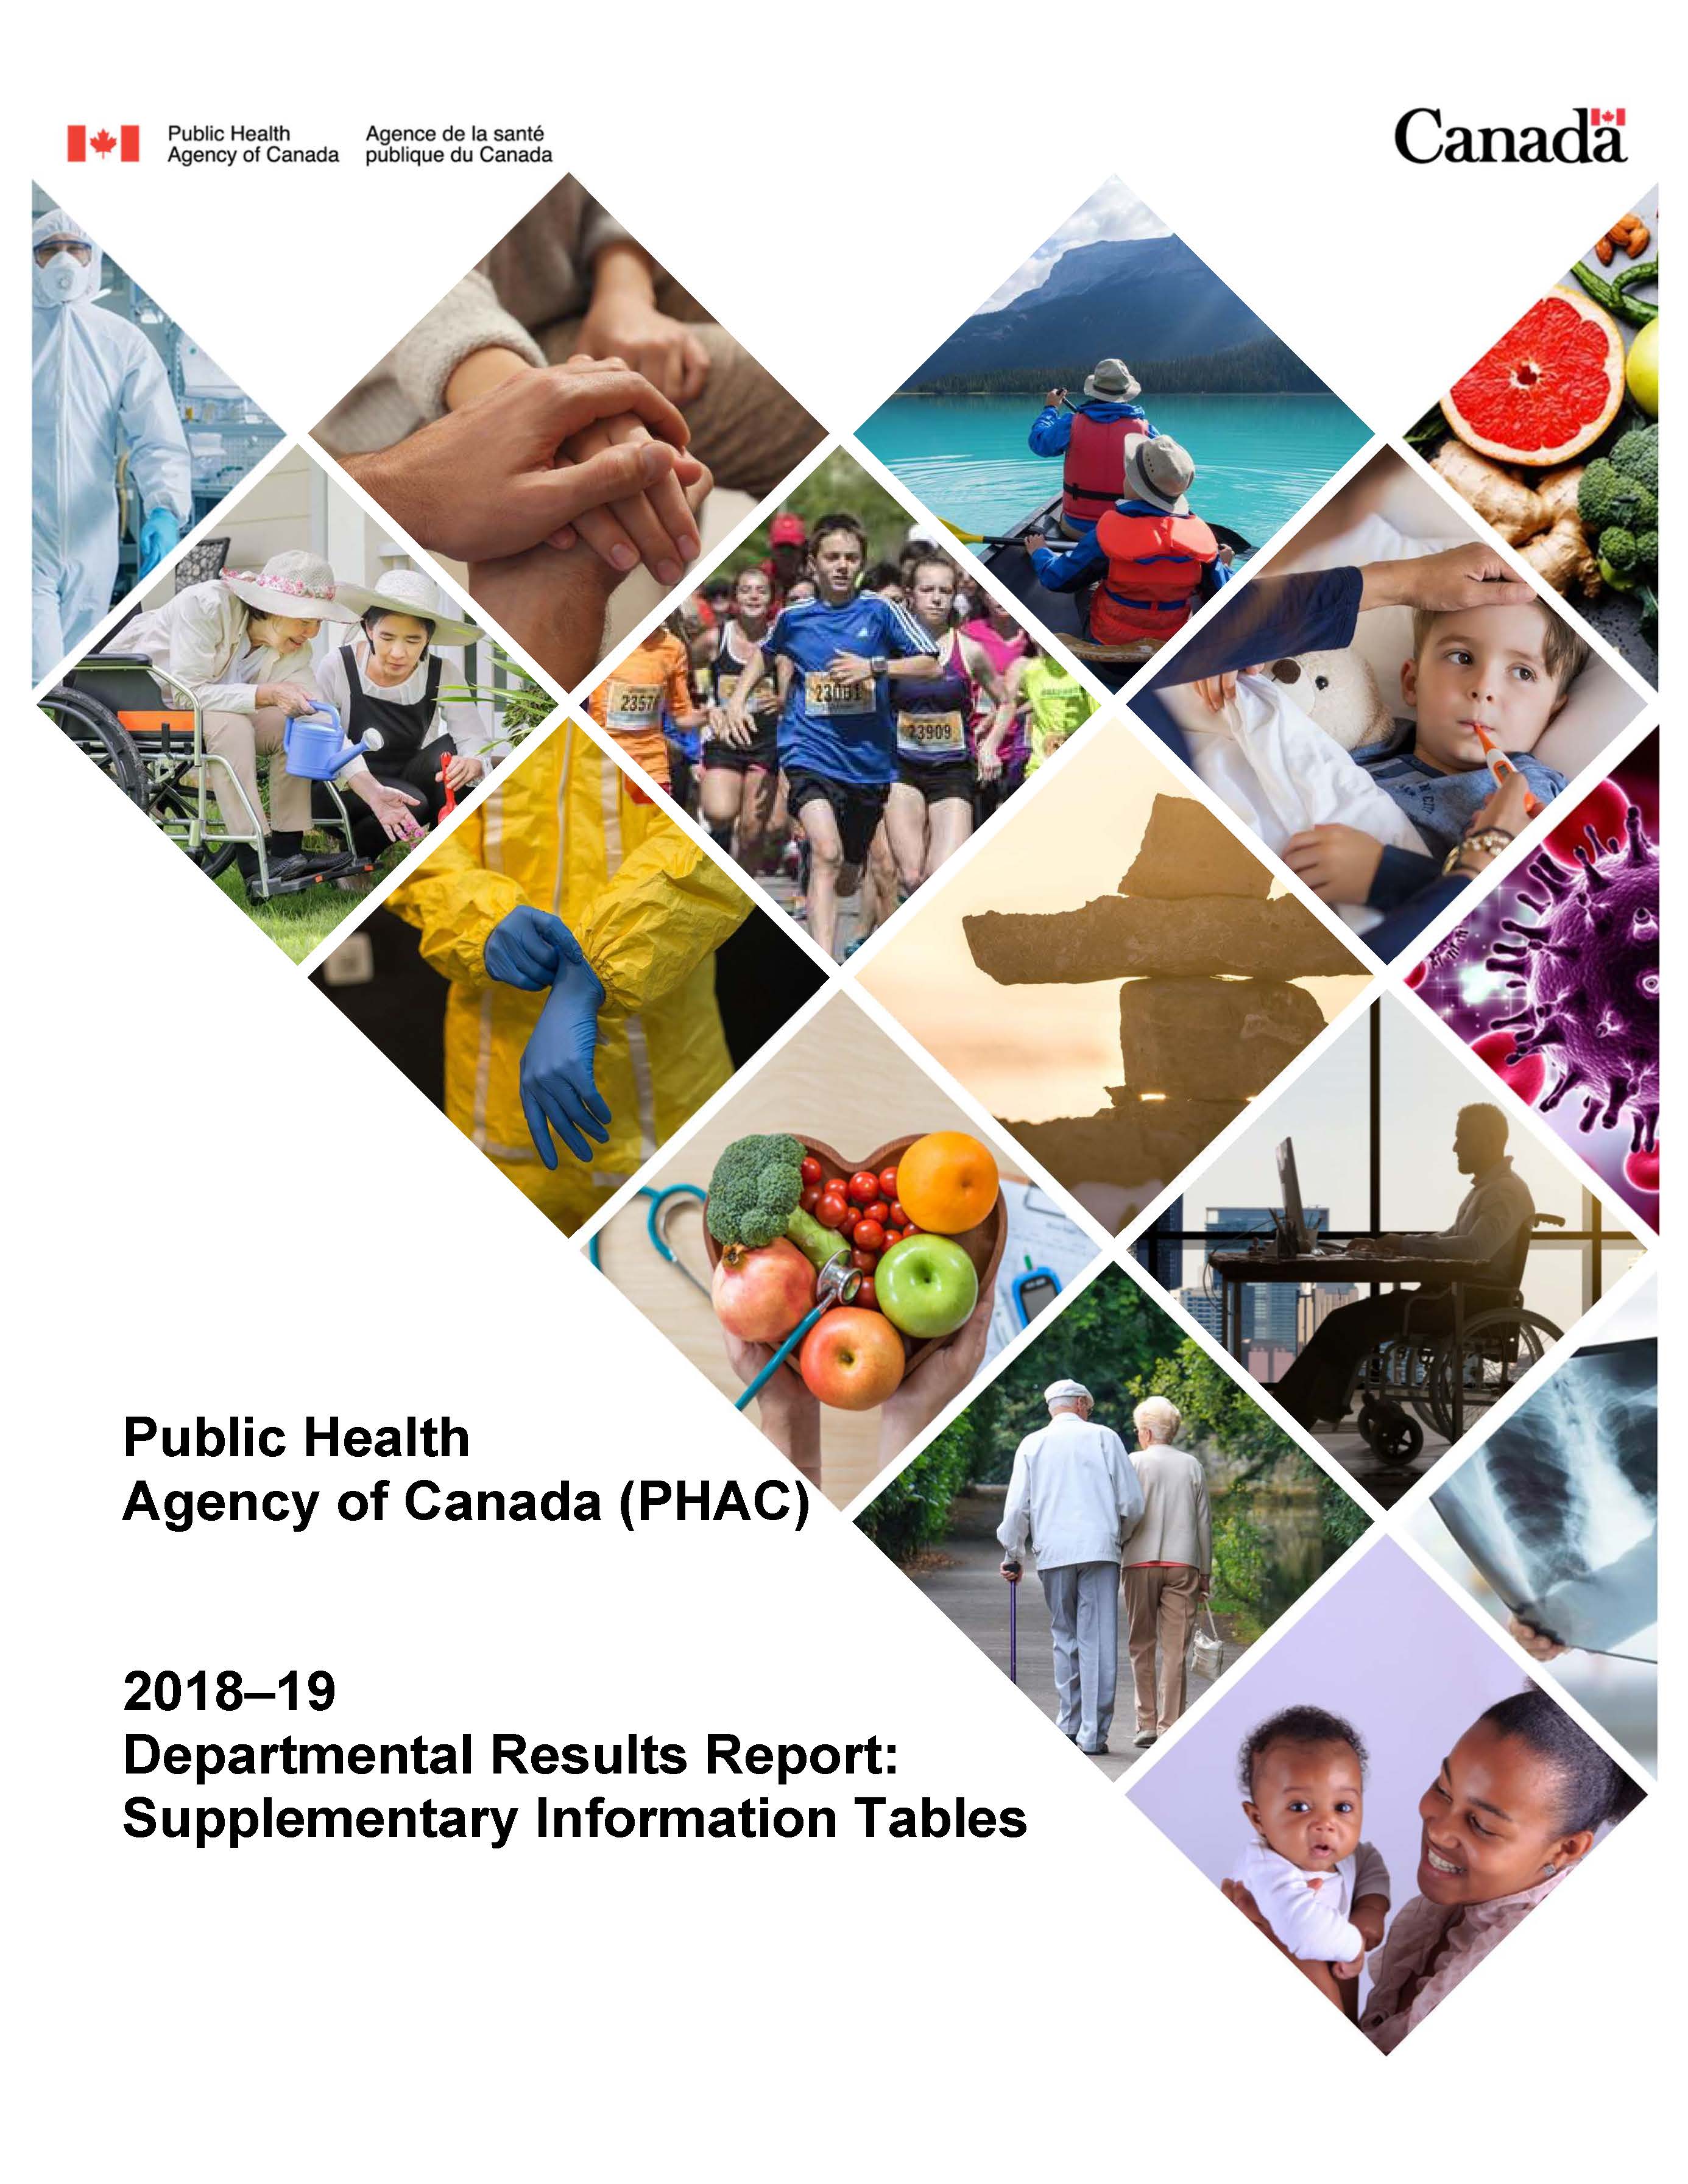 Public Health Agency of Canada (PHAC) 2018-19 Departmental results report: Supplementary information tables